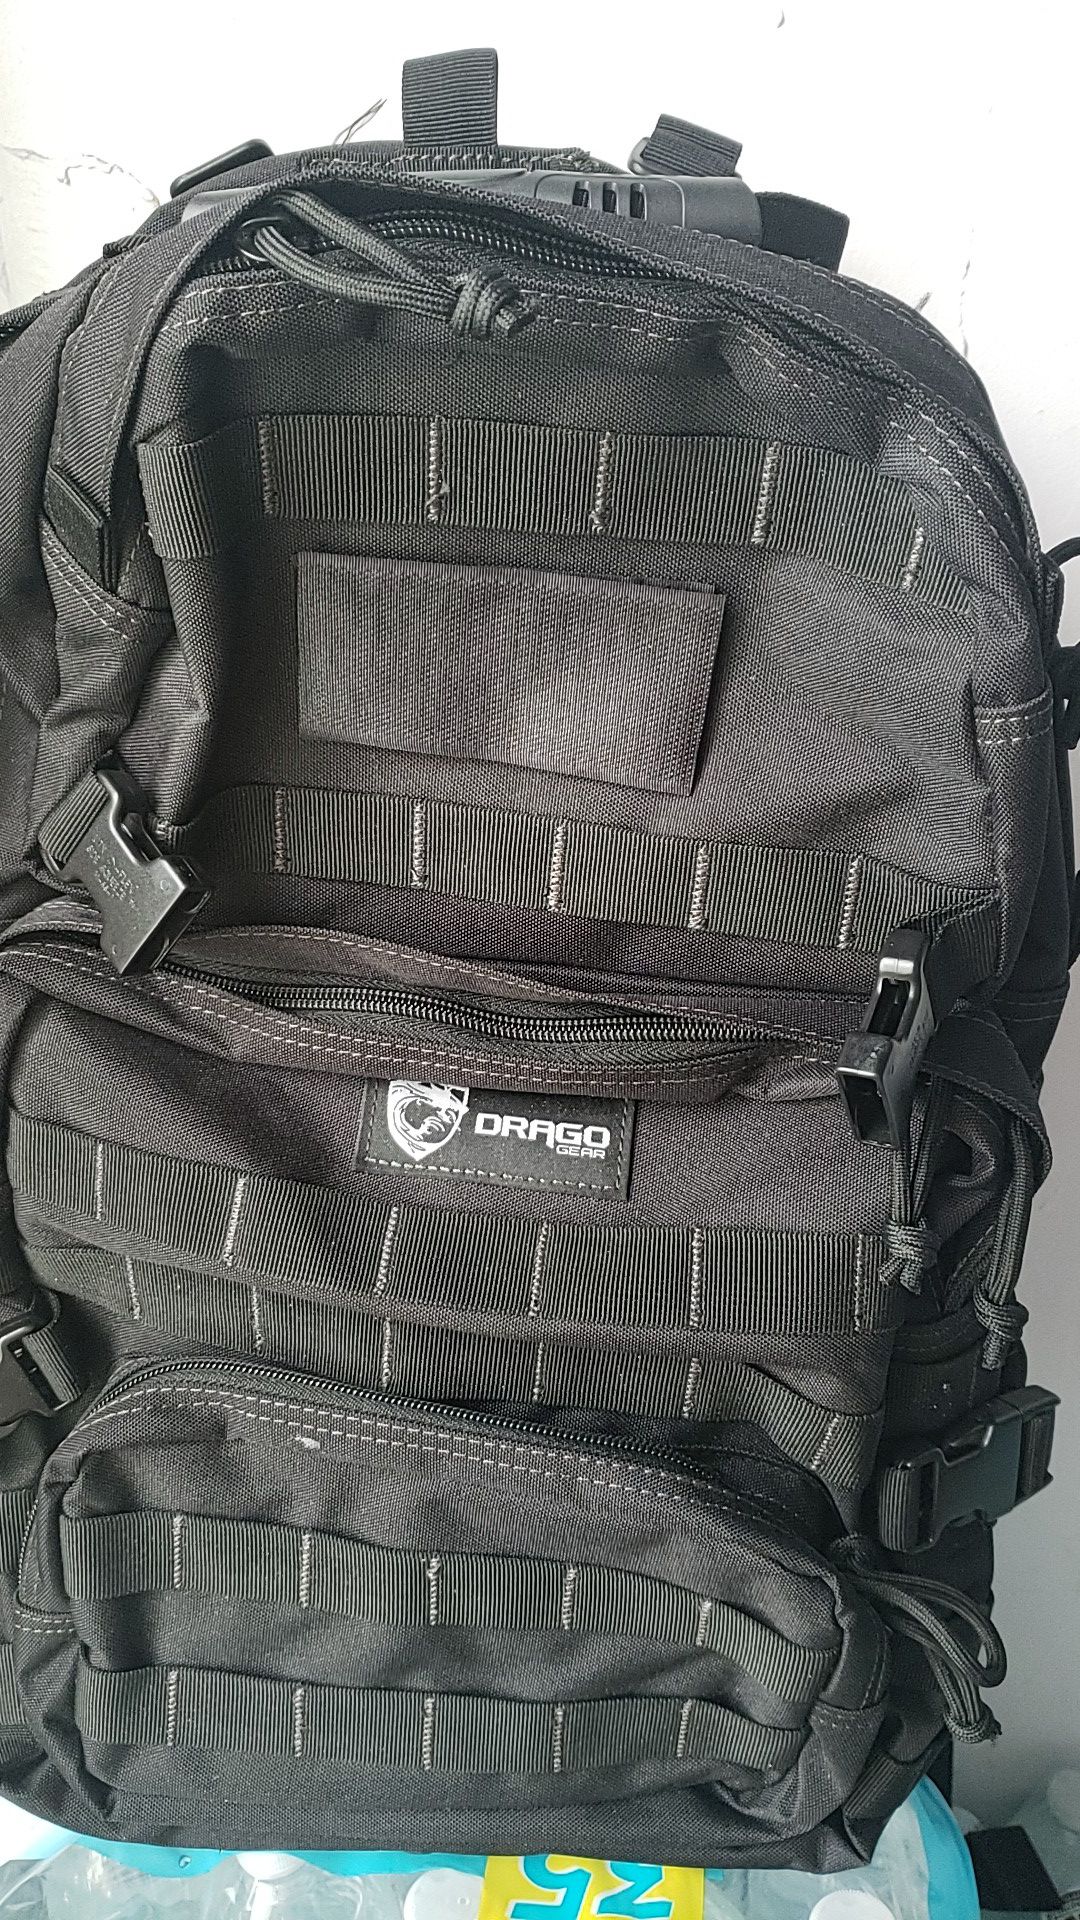 Drago military backpack. Never used. NEED TO SELL ASAP!! ACCEPTING OFFERS!!